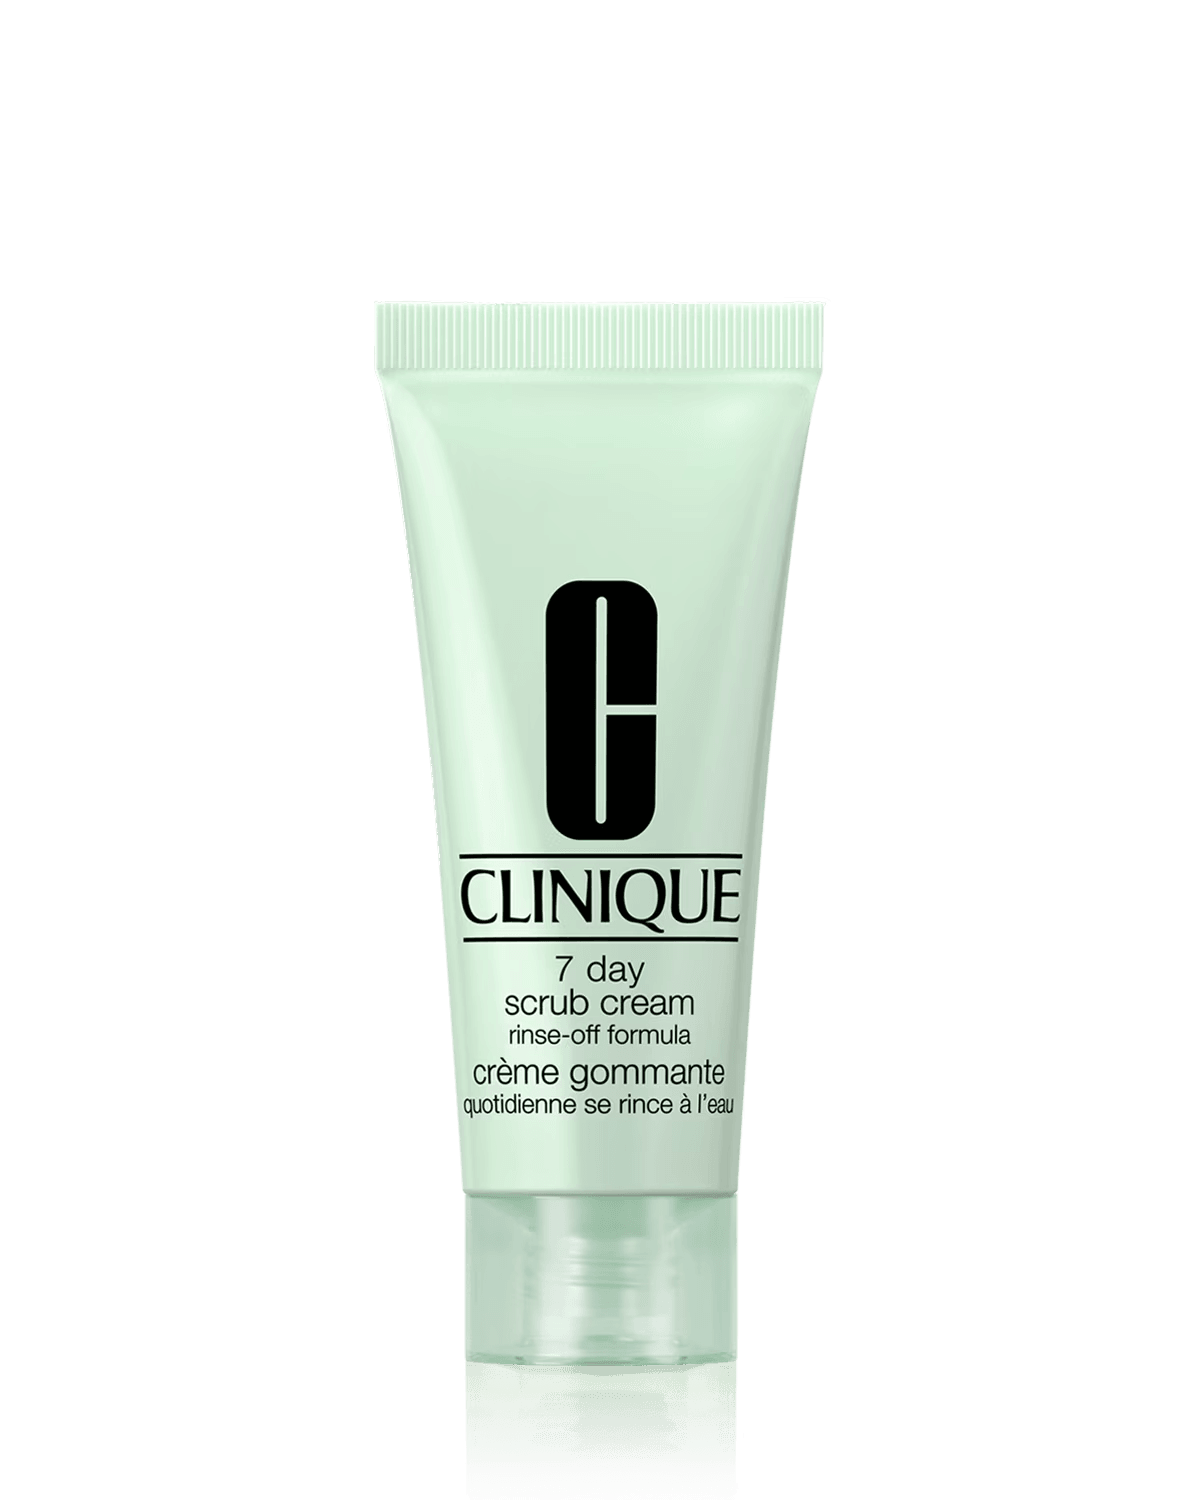 Крем-скраб Clinique 7 Day Rinse-Off Formula, 15 мл крем скраб clinique 7 day rinse off formula 100 мл